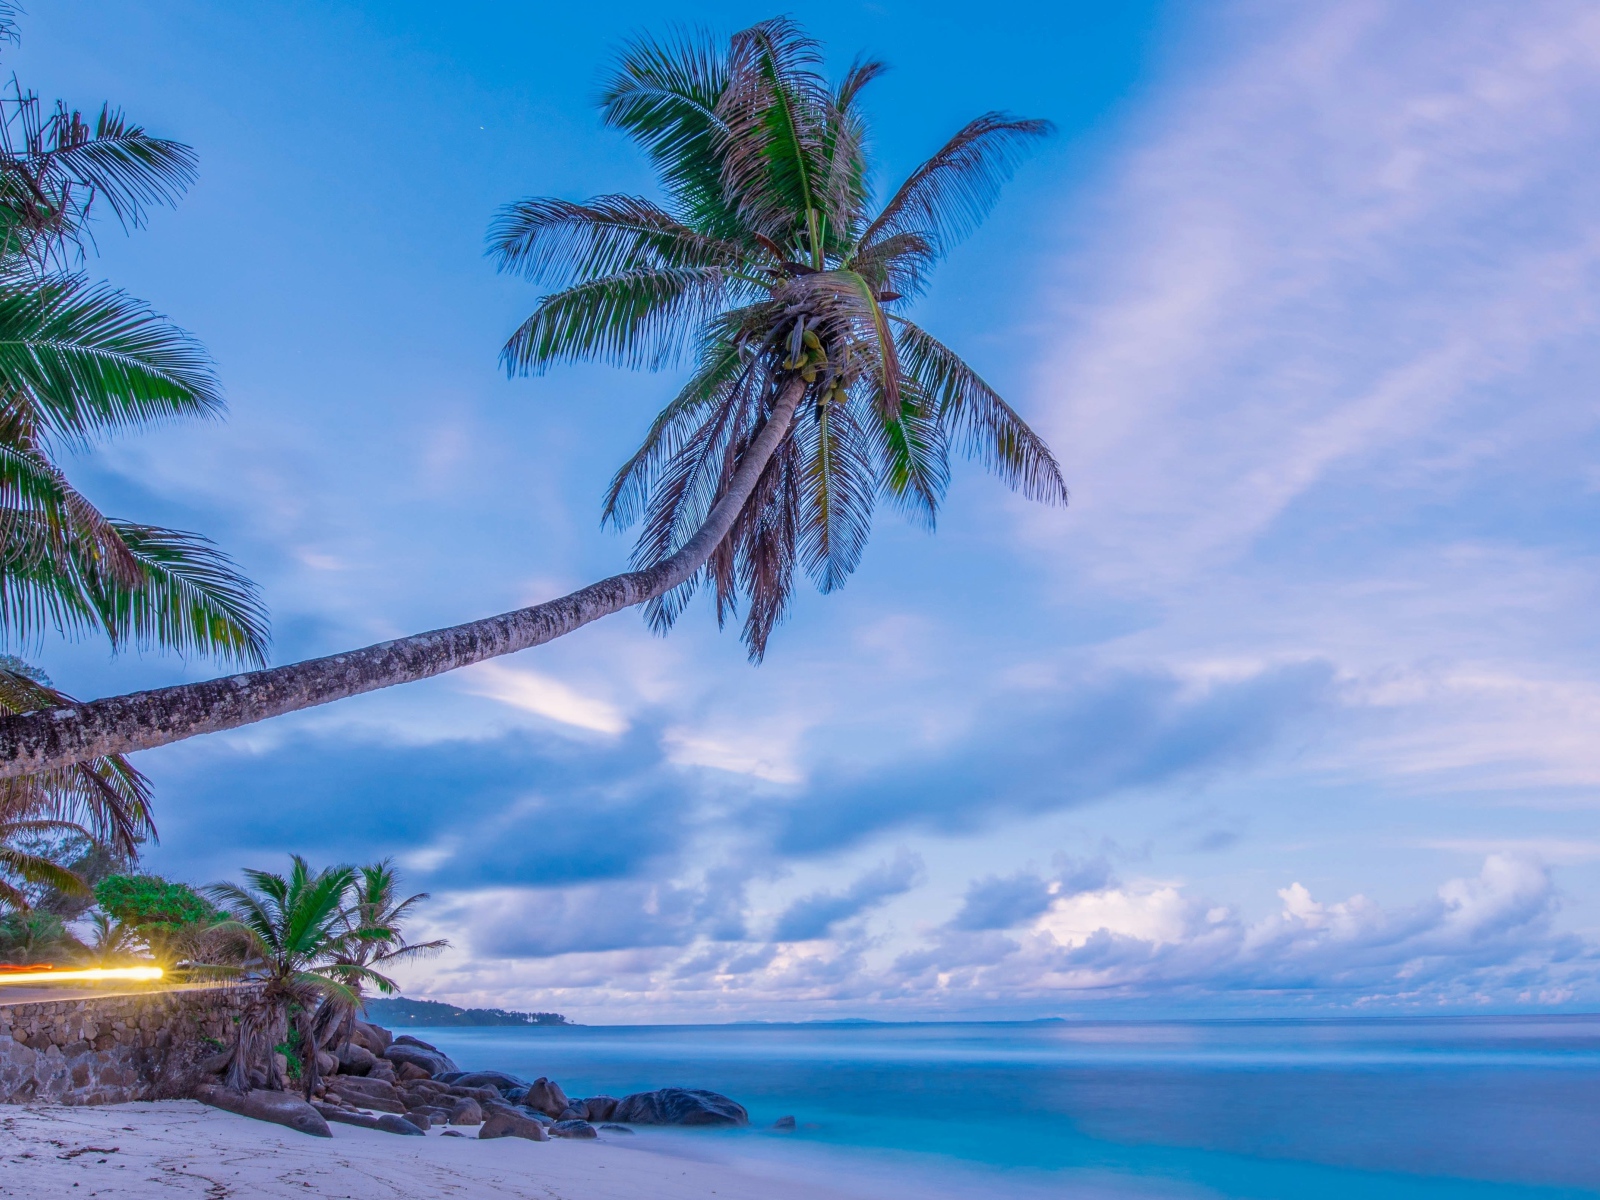 Big palm tree on a tropical beach in the background of a beautiful sky